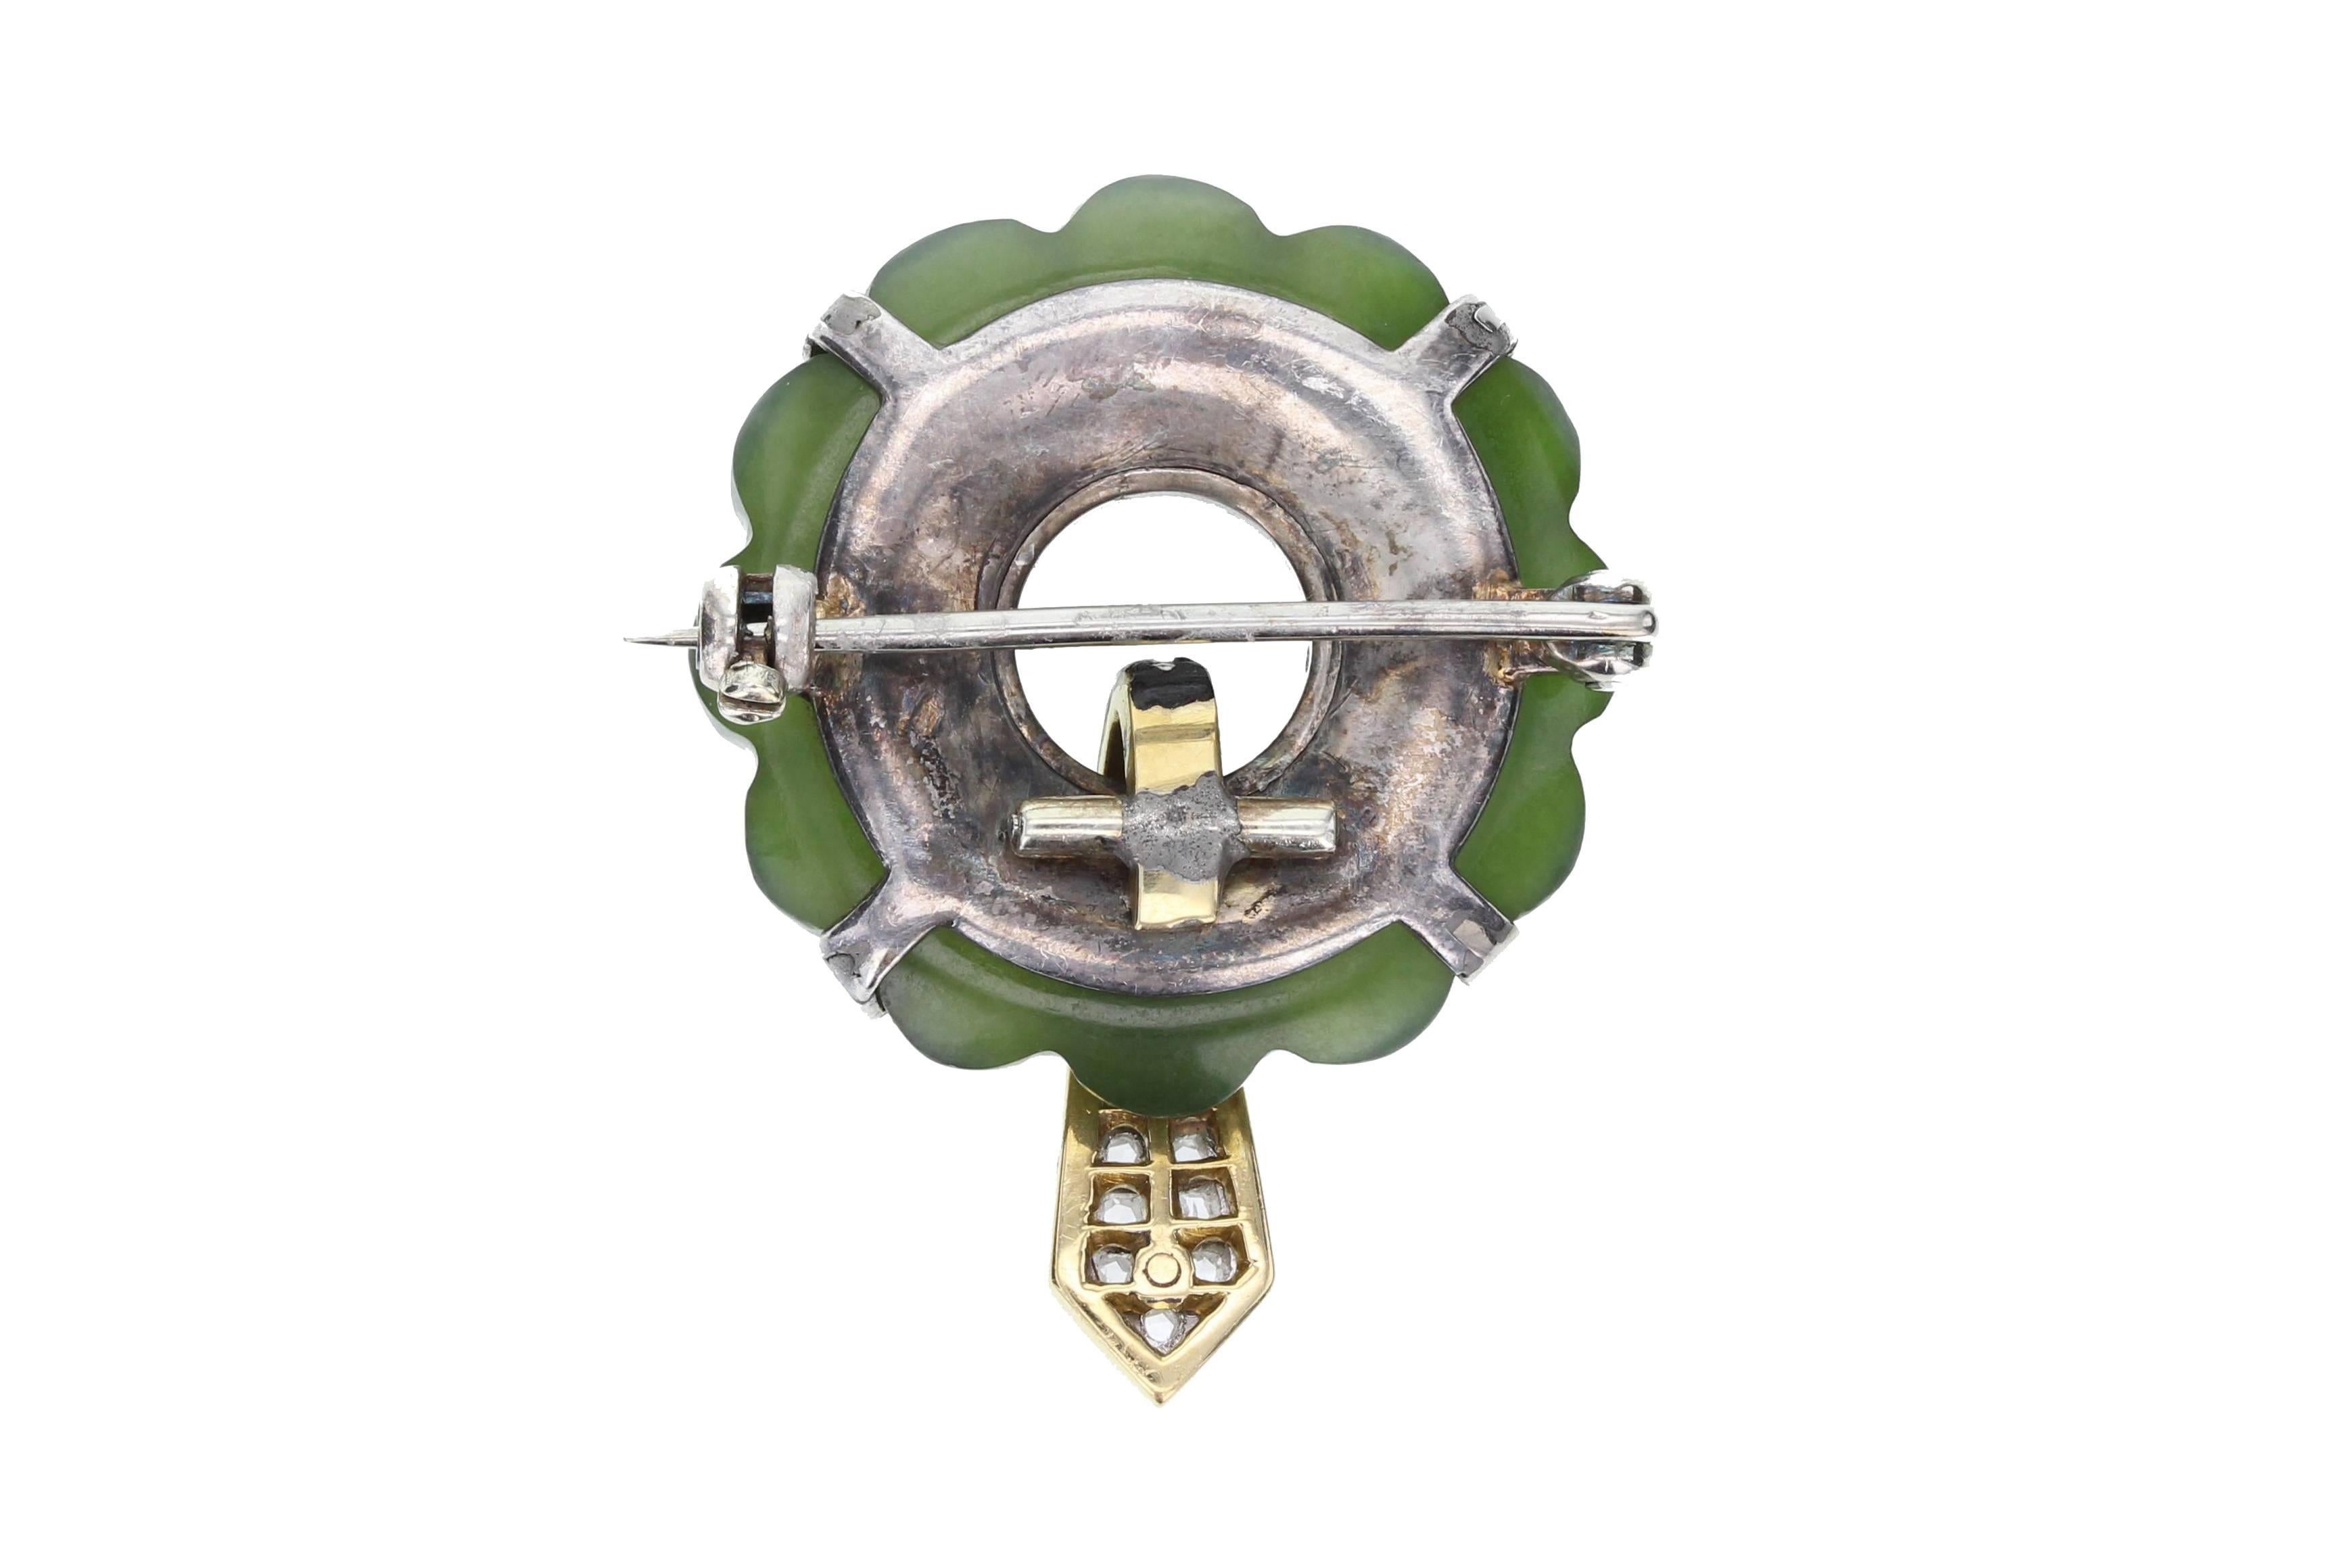 Deep green carved jade piece with a pierced centre mounted in four platinum claws, each set with a single rose-cut diamond. Black enamel detailing at the centre with a tapering gold-piece extending from the centre with black enamel border and pave